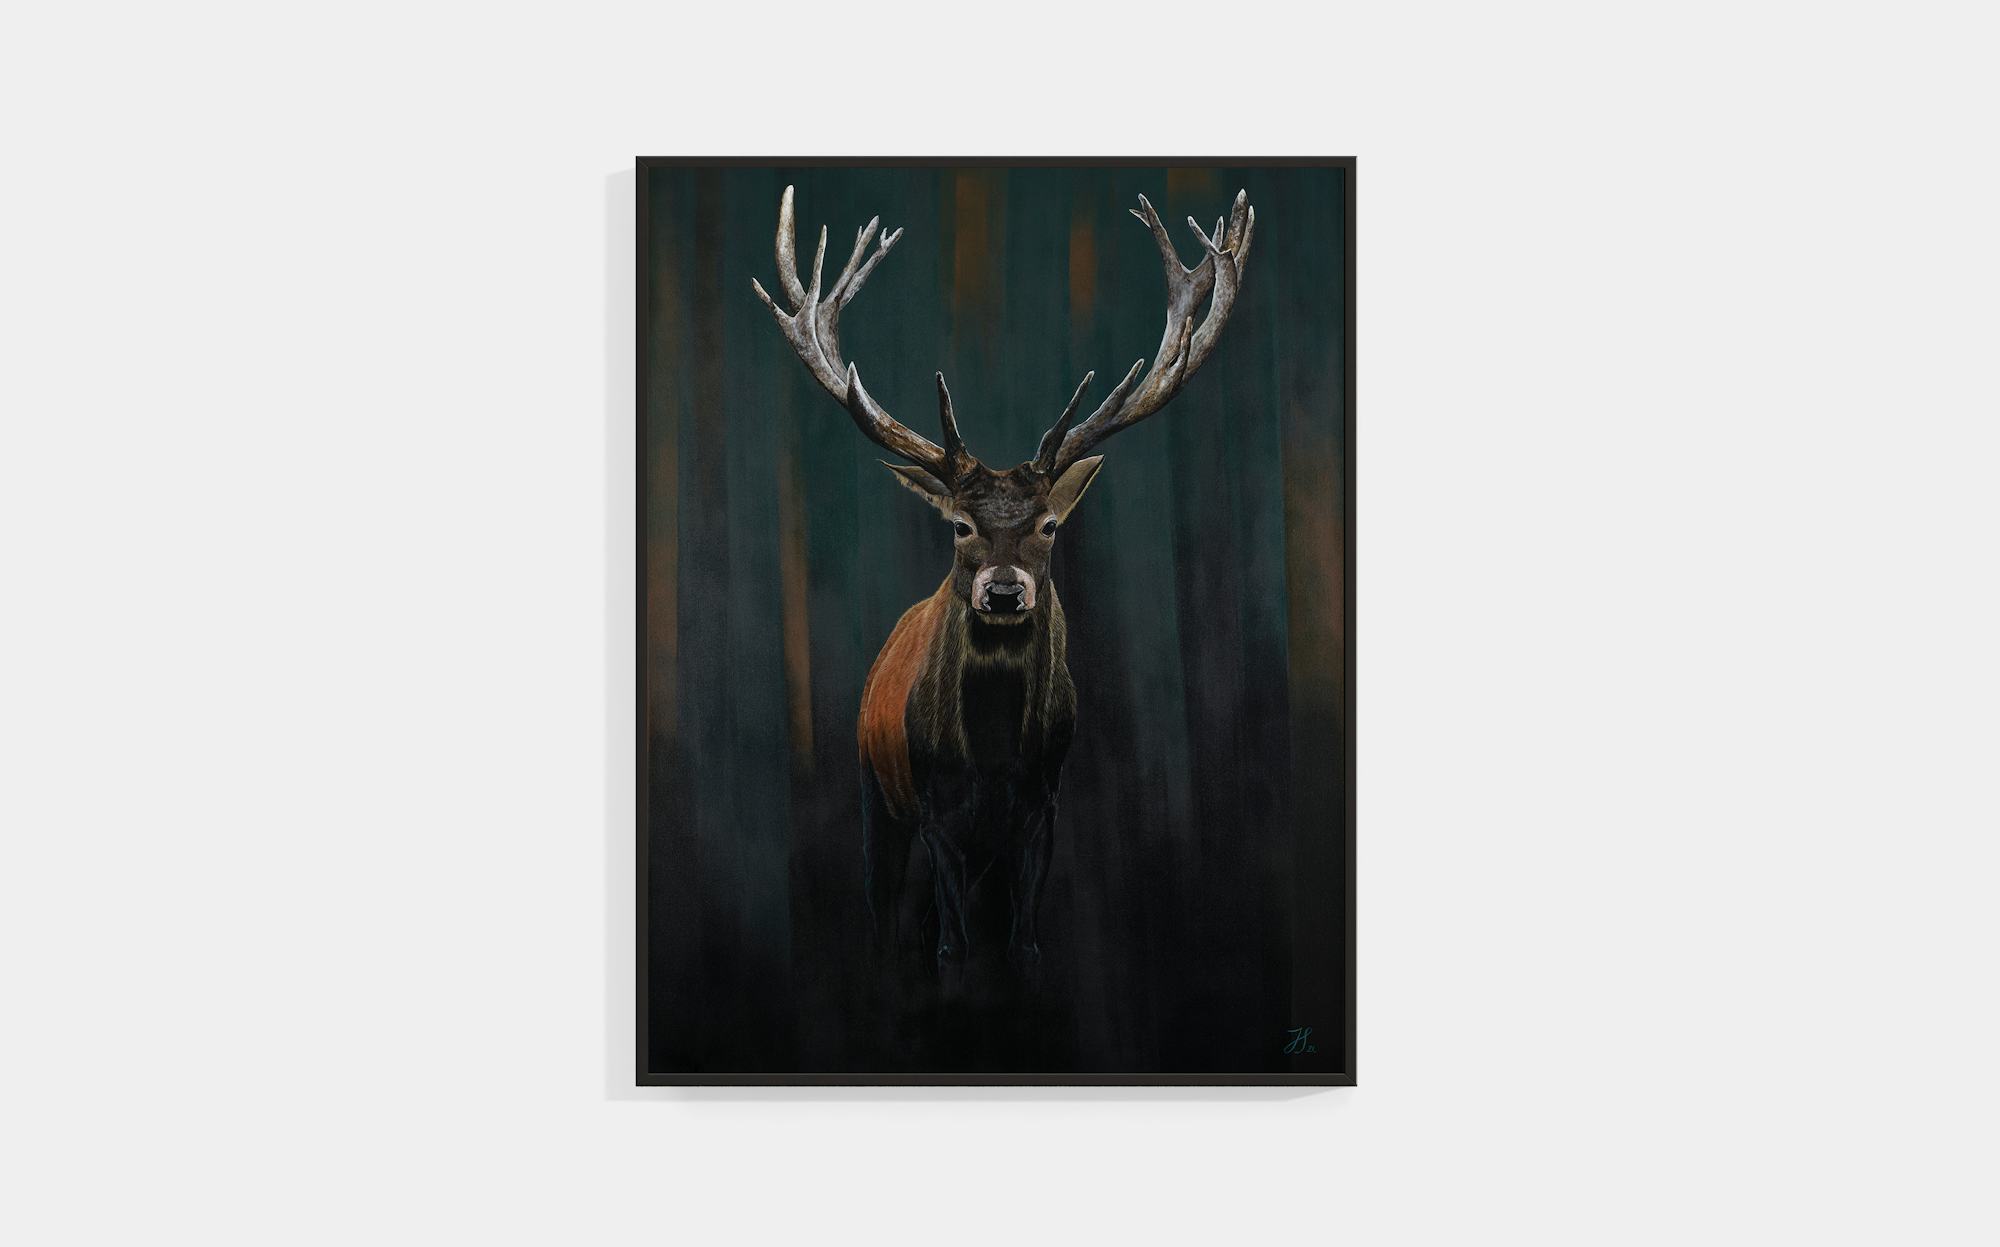 Original painting of a NZ red stag on an abstract, dark background.